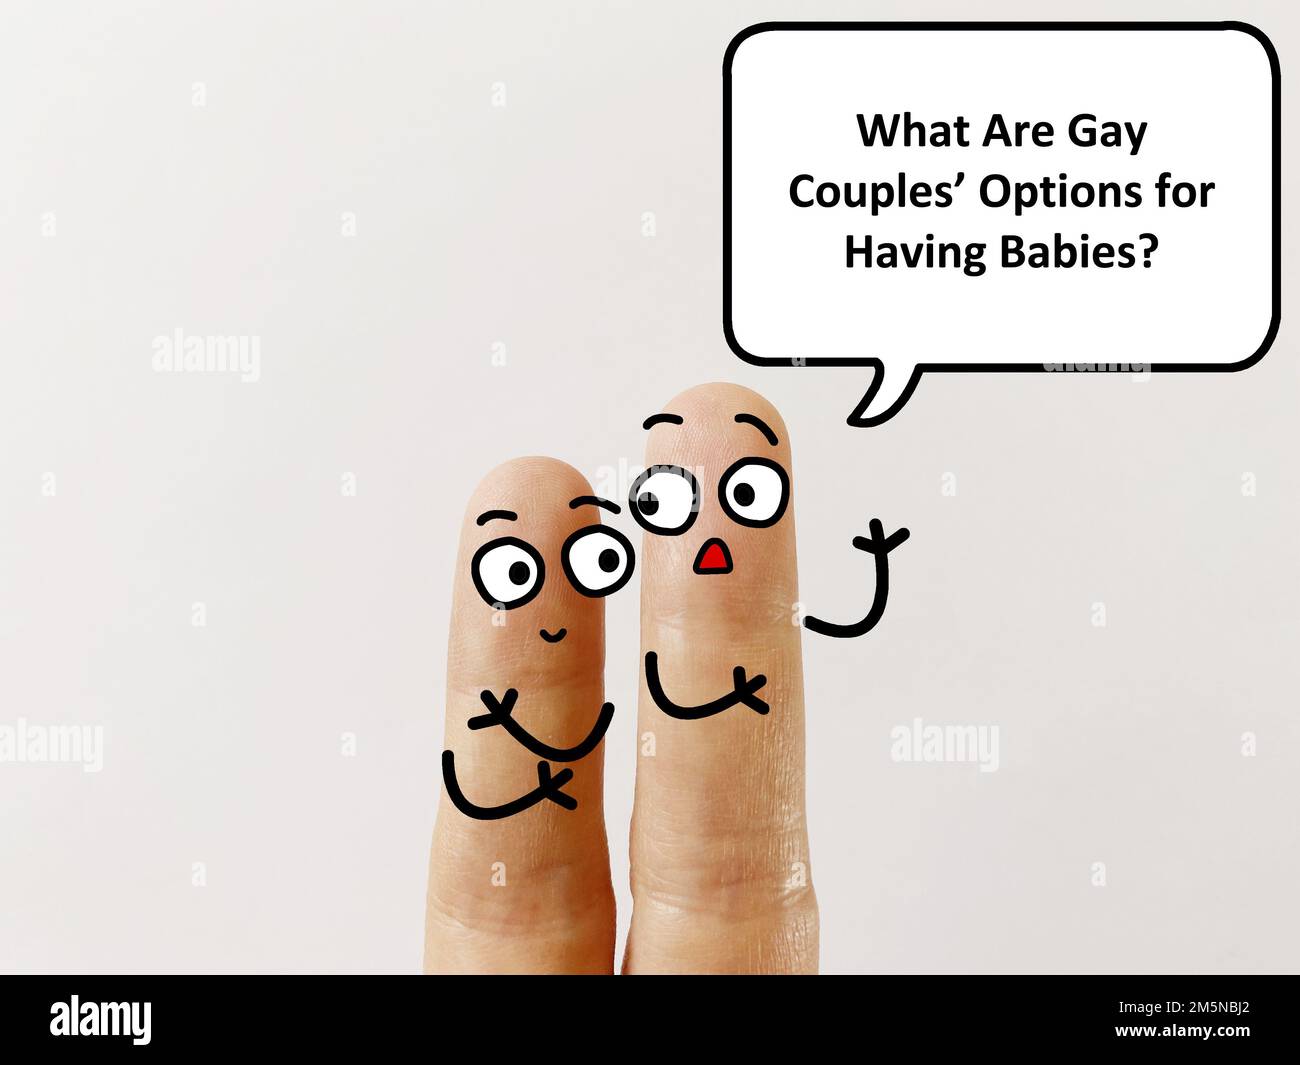 Two fingers are decorated as two person. One of them is asking what are gay couples' options for having babies. Stock Photo